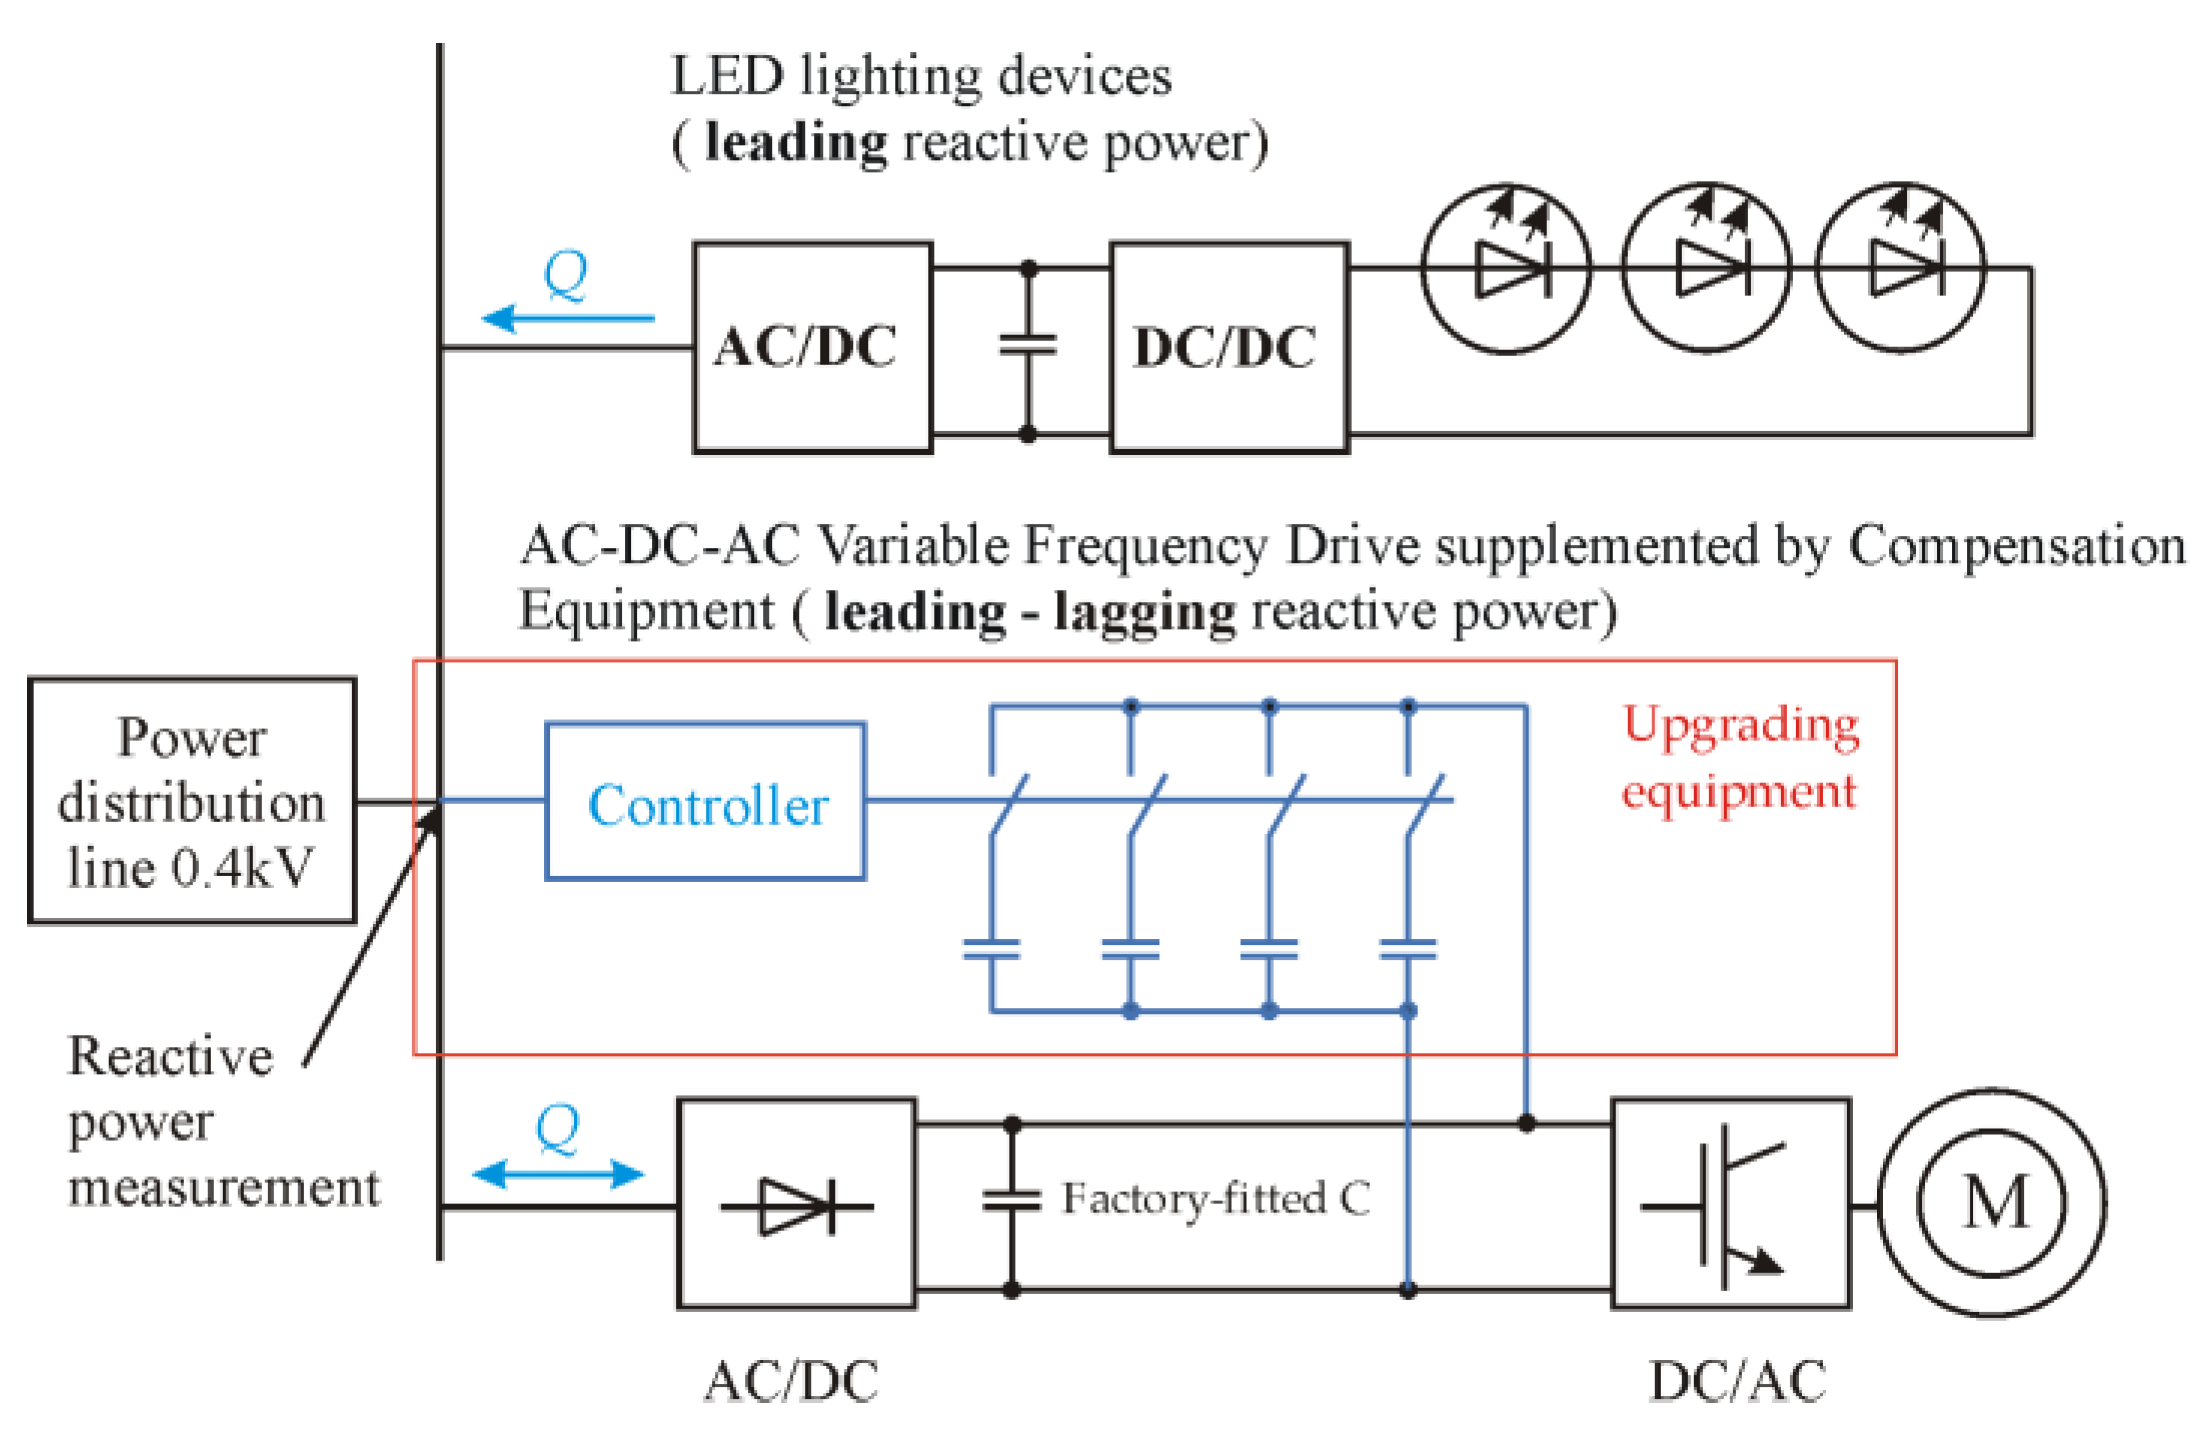 Applied Sciences | Free Full-Text | Application of Single-Phase Supply  AC-DC-AC VFD for Power Factor Improvement in LED Lighting Devices Loaded  Power Distribution Lines | HTML